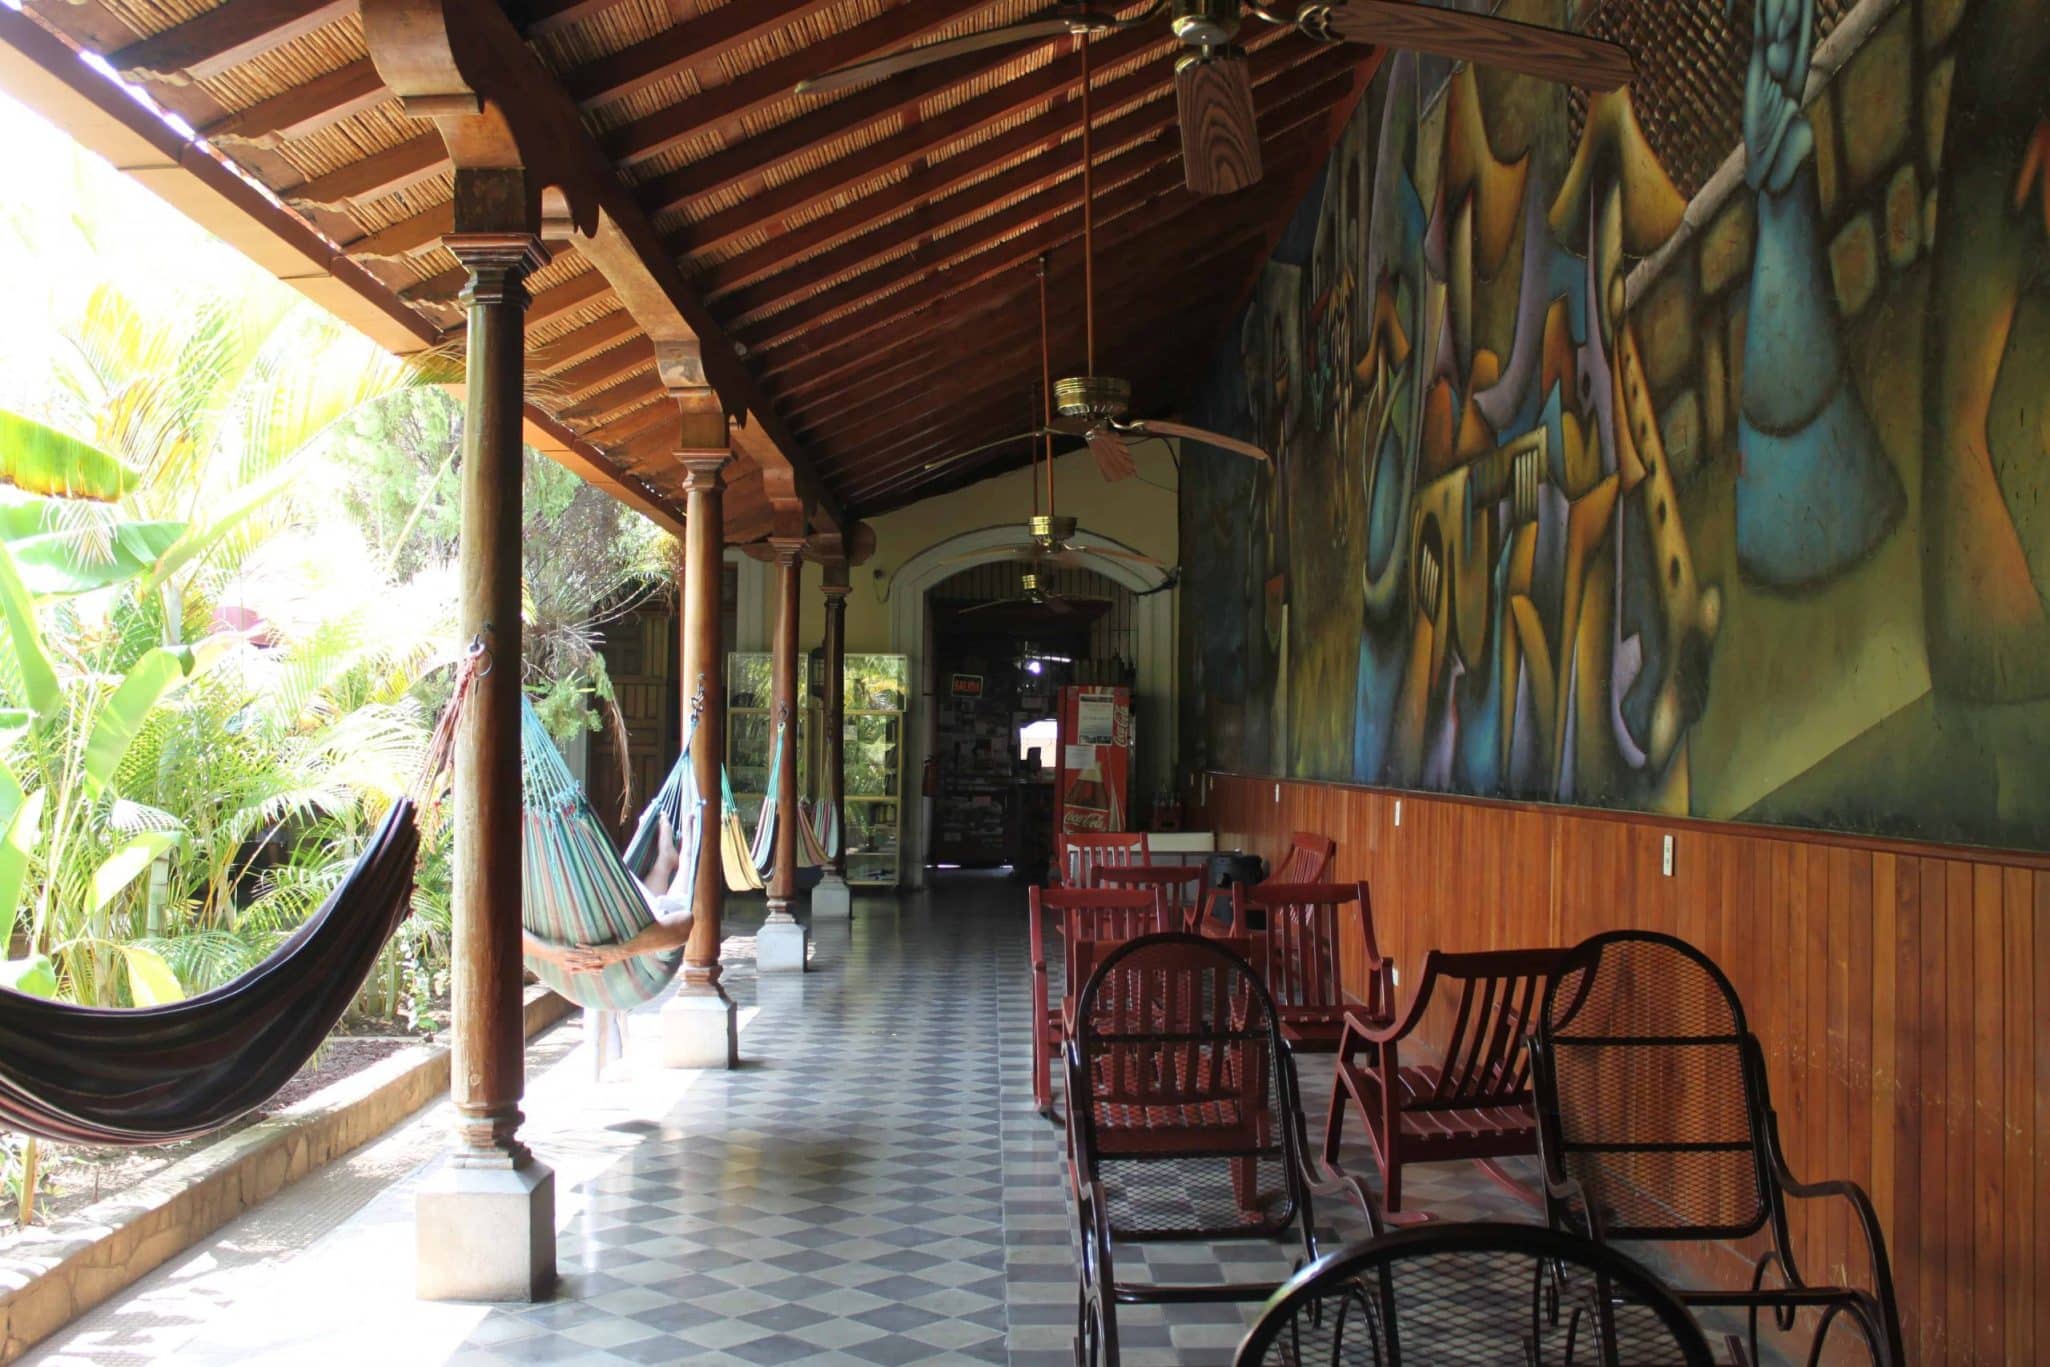 Hotel review | The Oasis hostel, Nicaragua